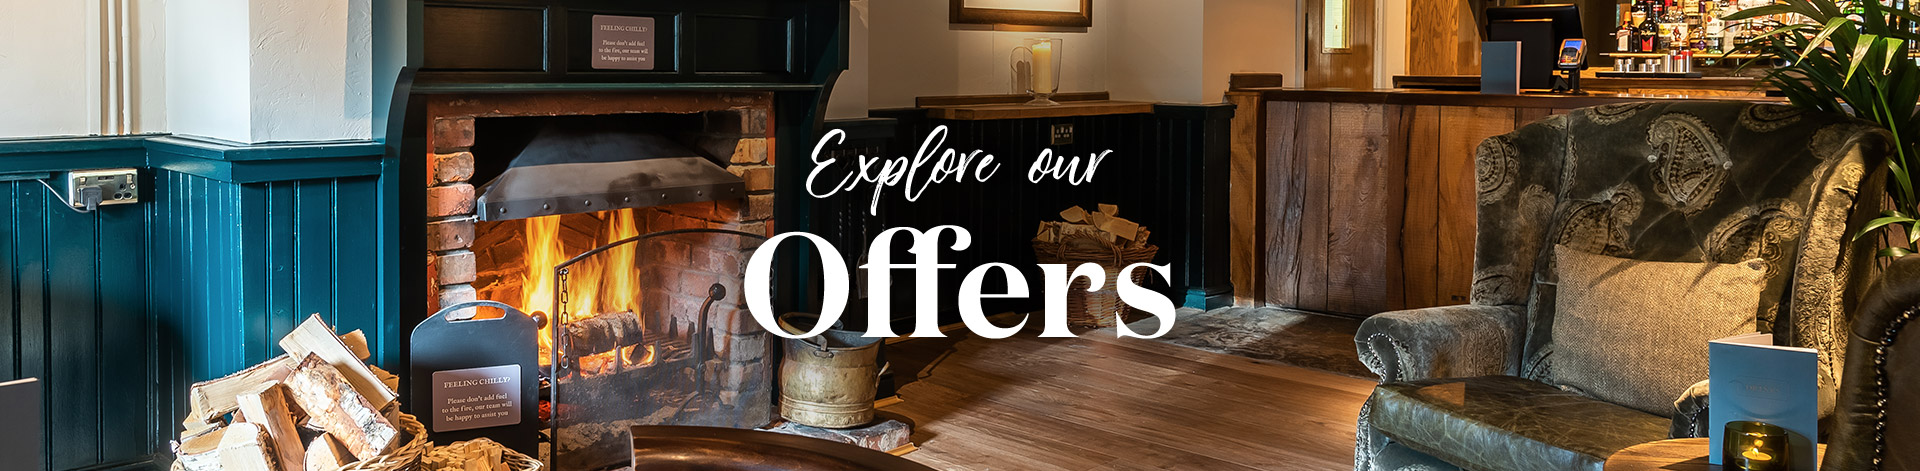 Our latest offers at The Thatched House